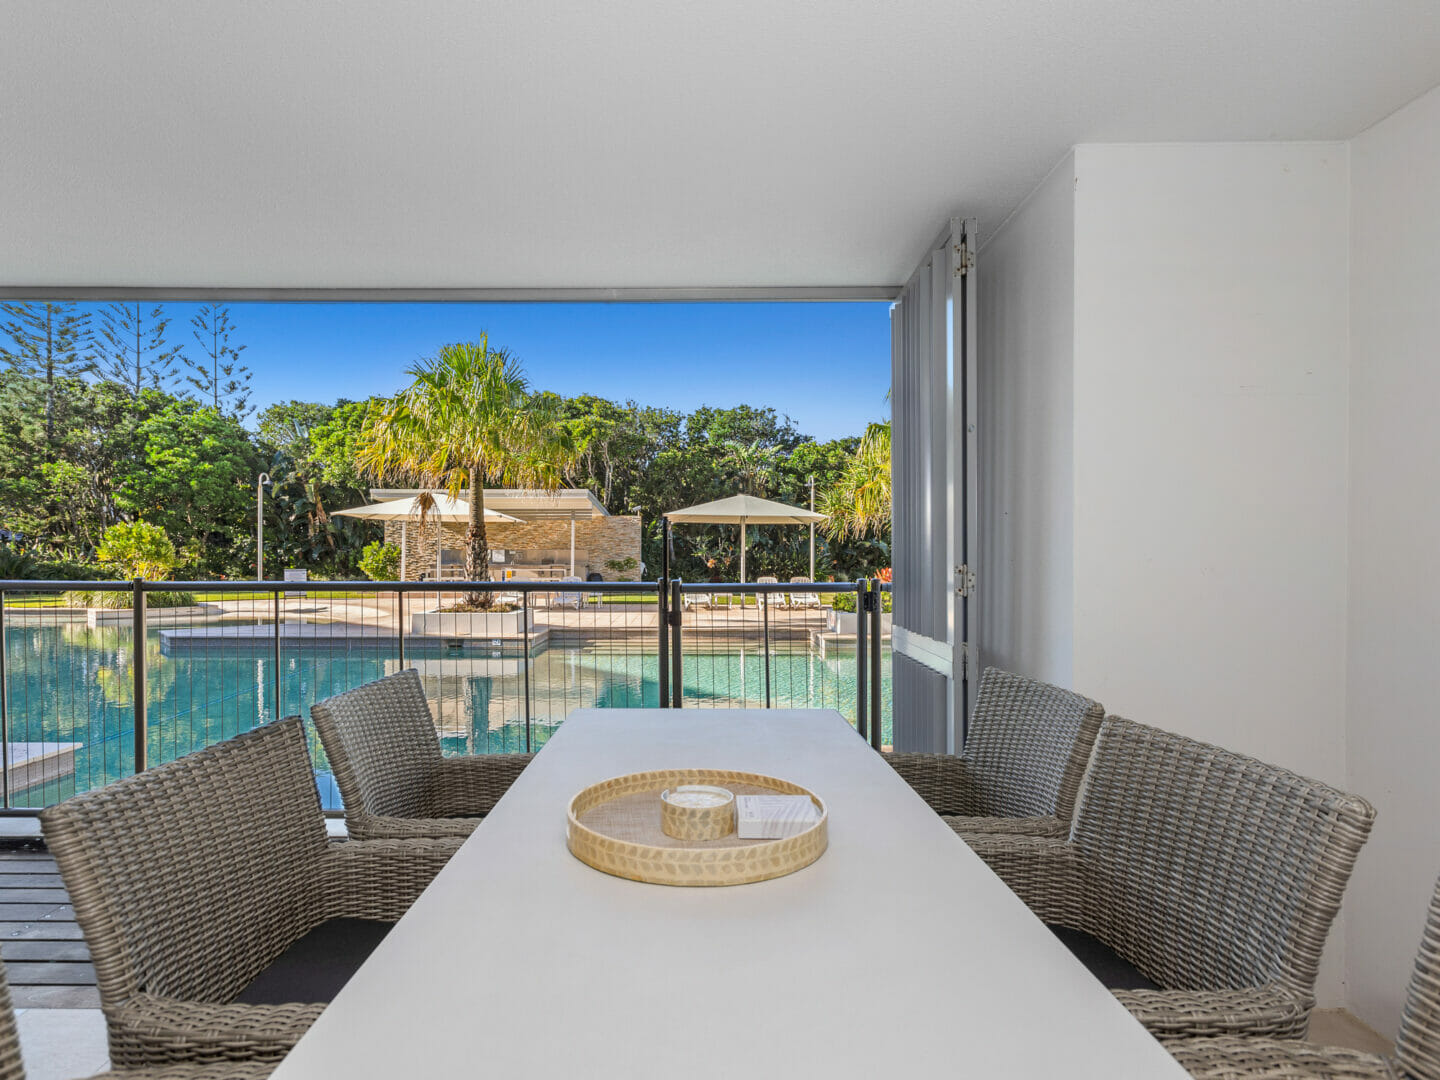 Pool deck area with outdoor dining table for six, overlooking pool